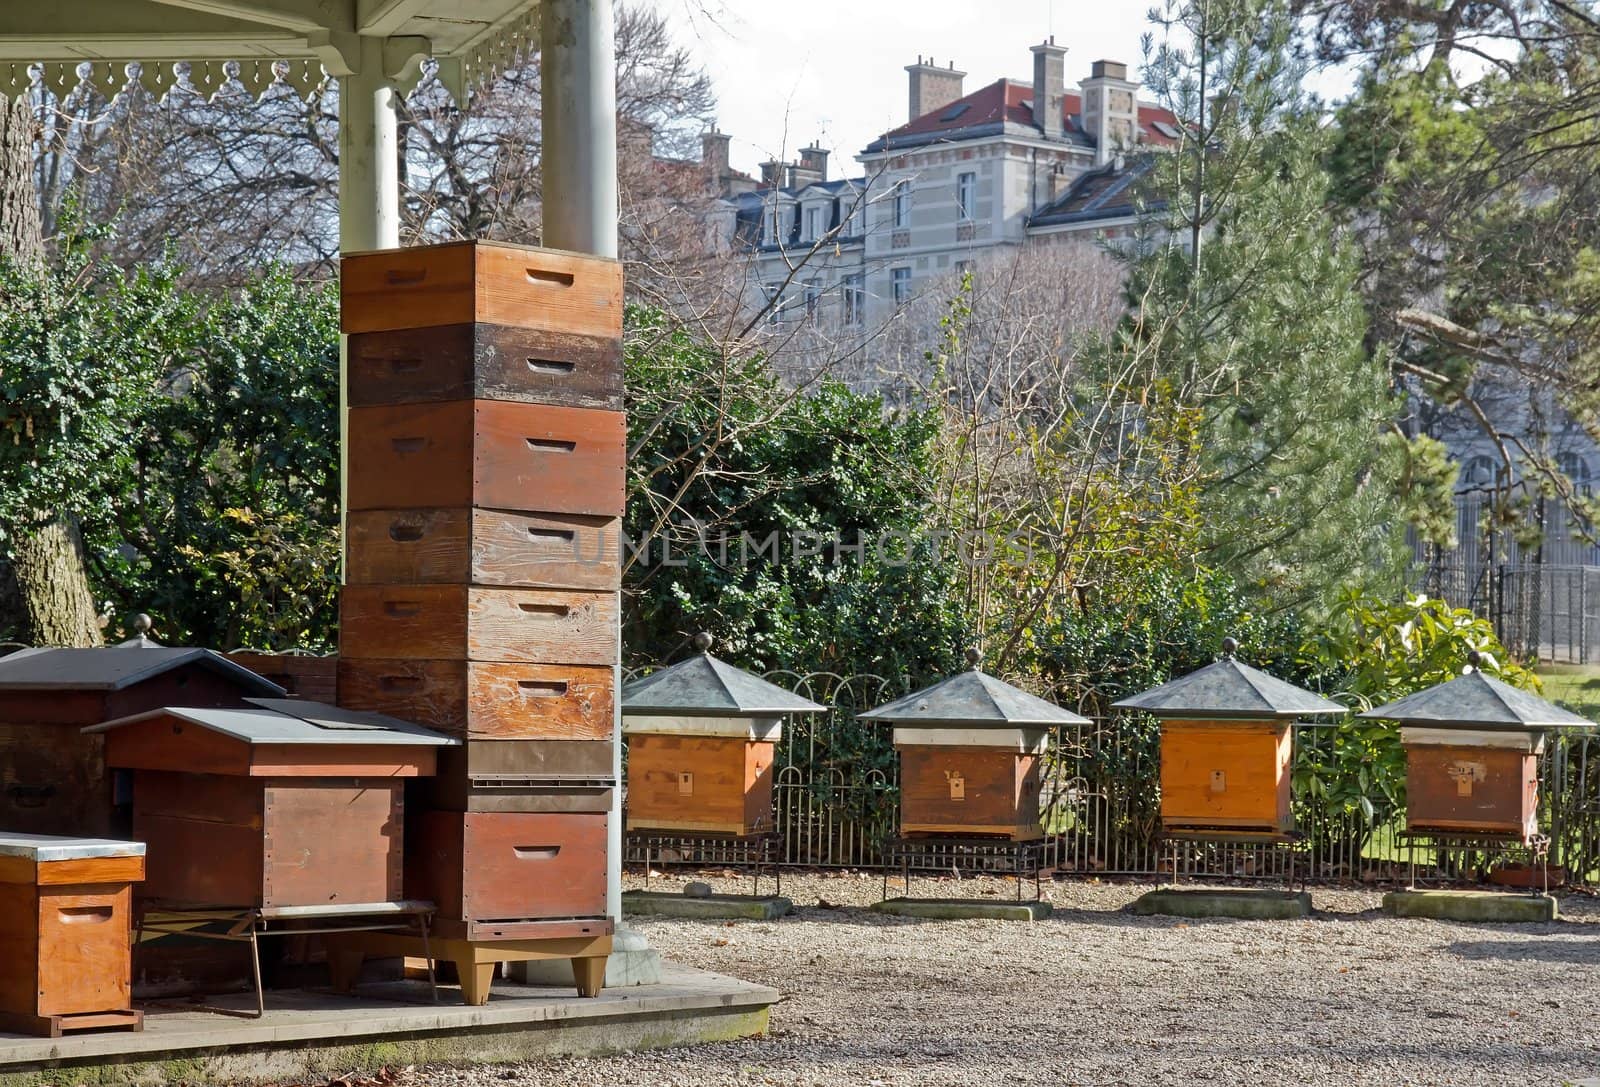 hives in the city by neko92vl